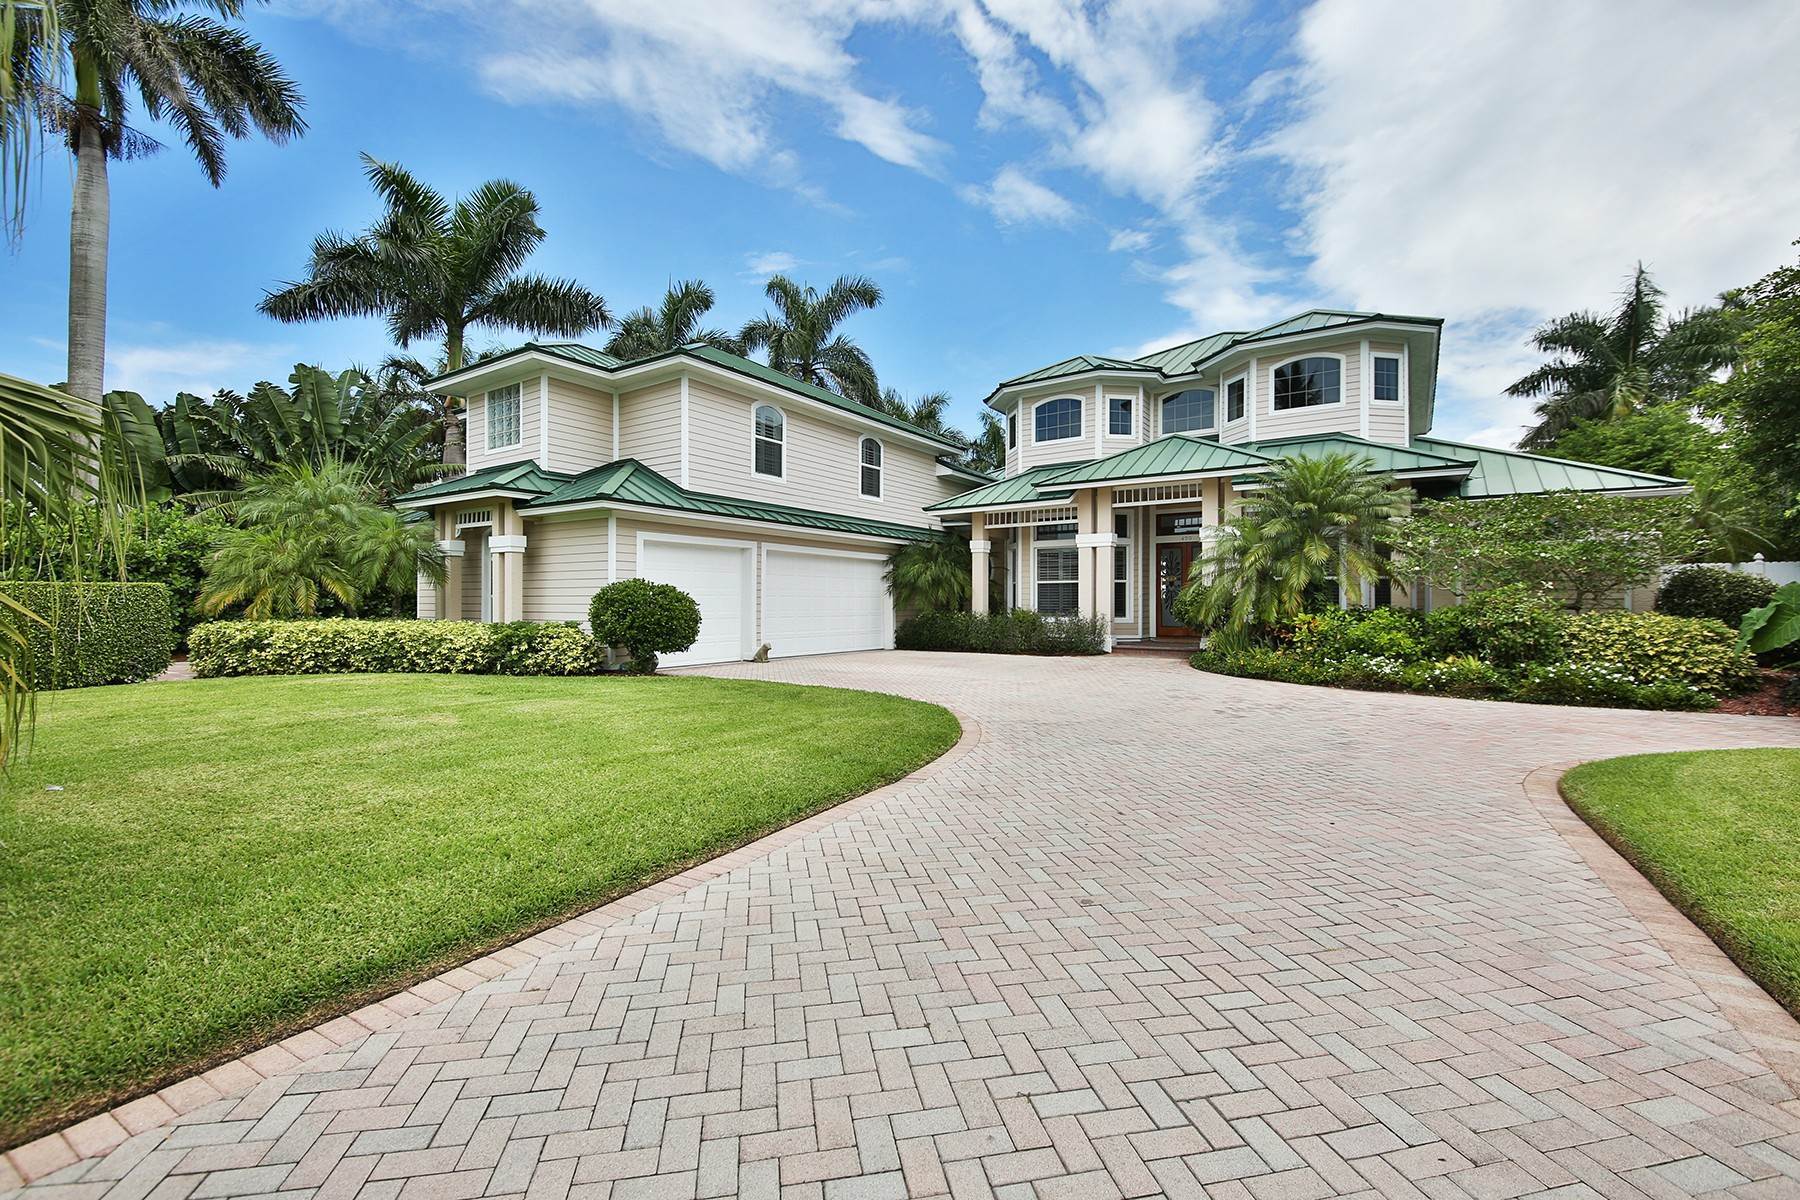 Other Residential Homes at OLD NAPLES 450 Palm Cir W Naples, Florida 34102 United States